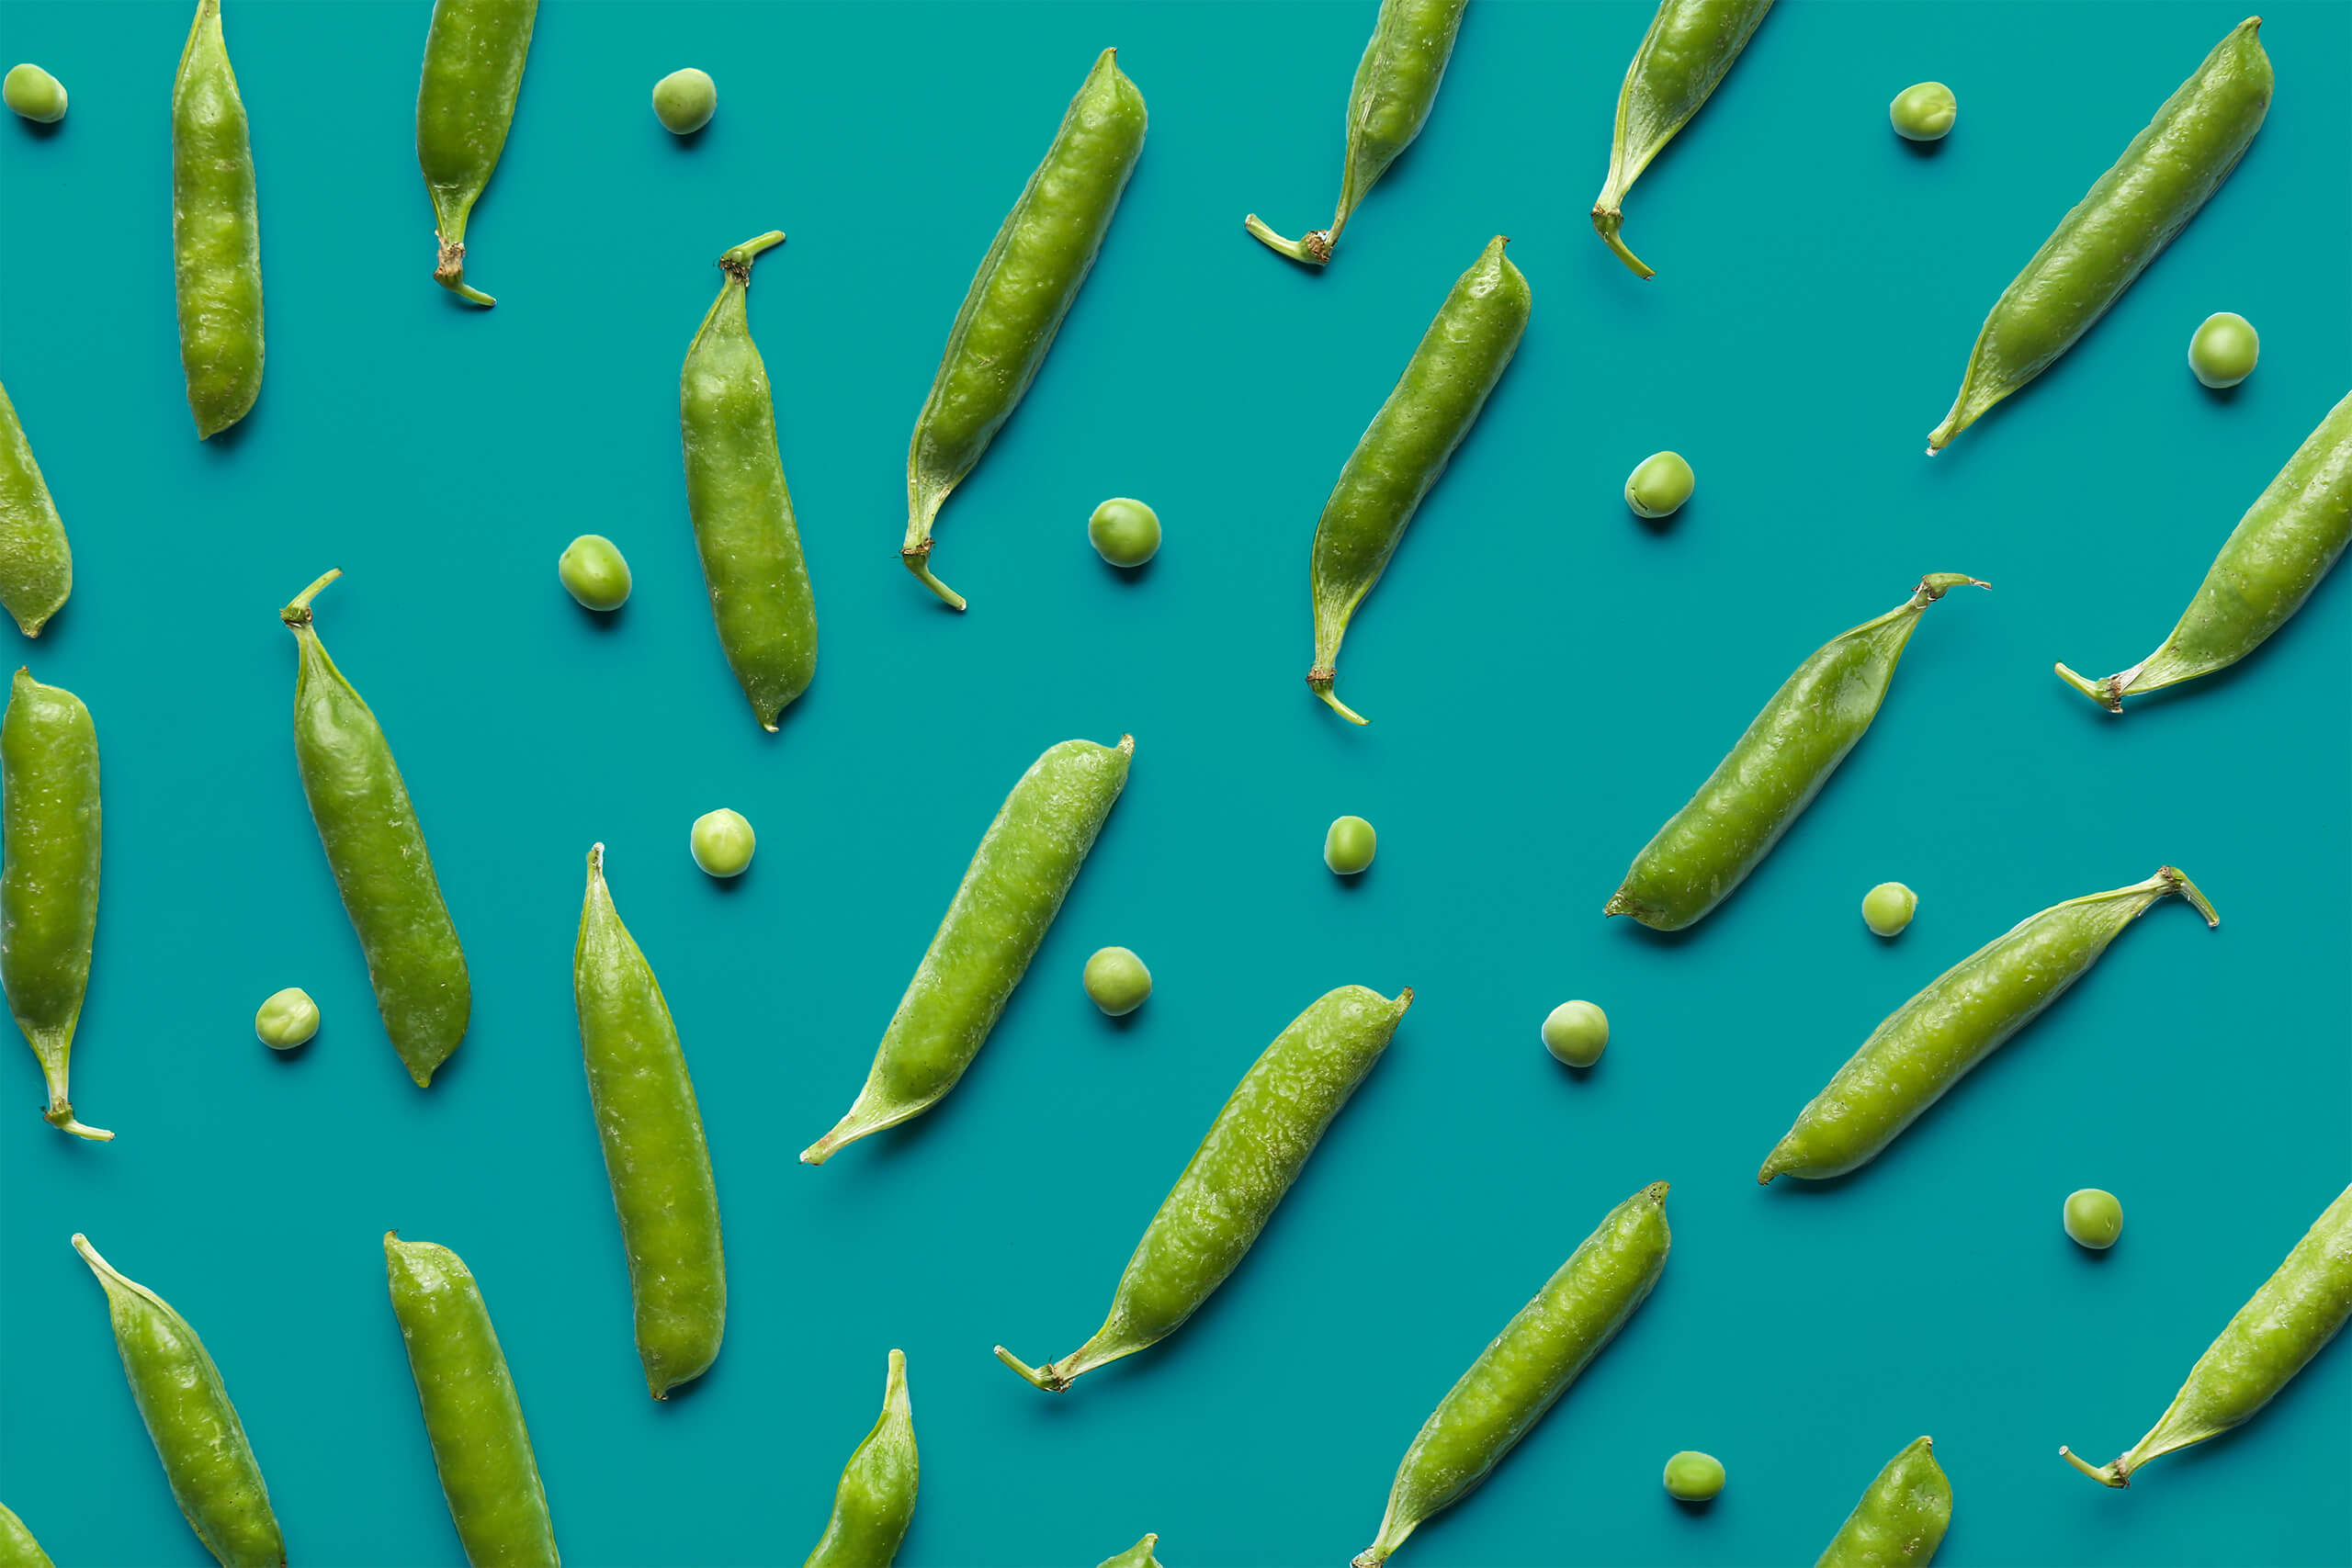 pea pods and peas against a teal background